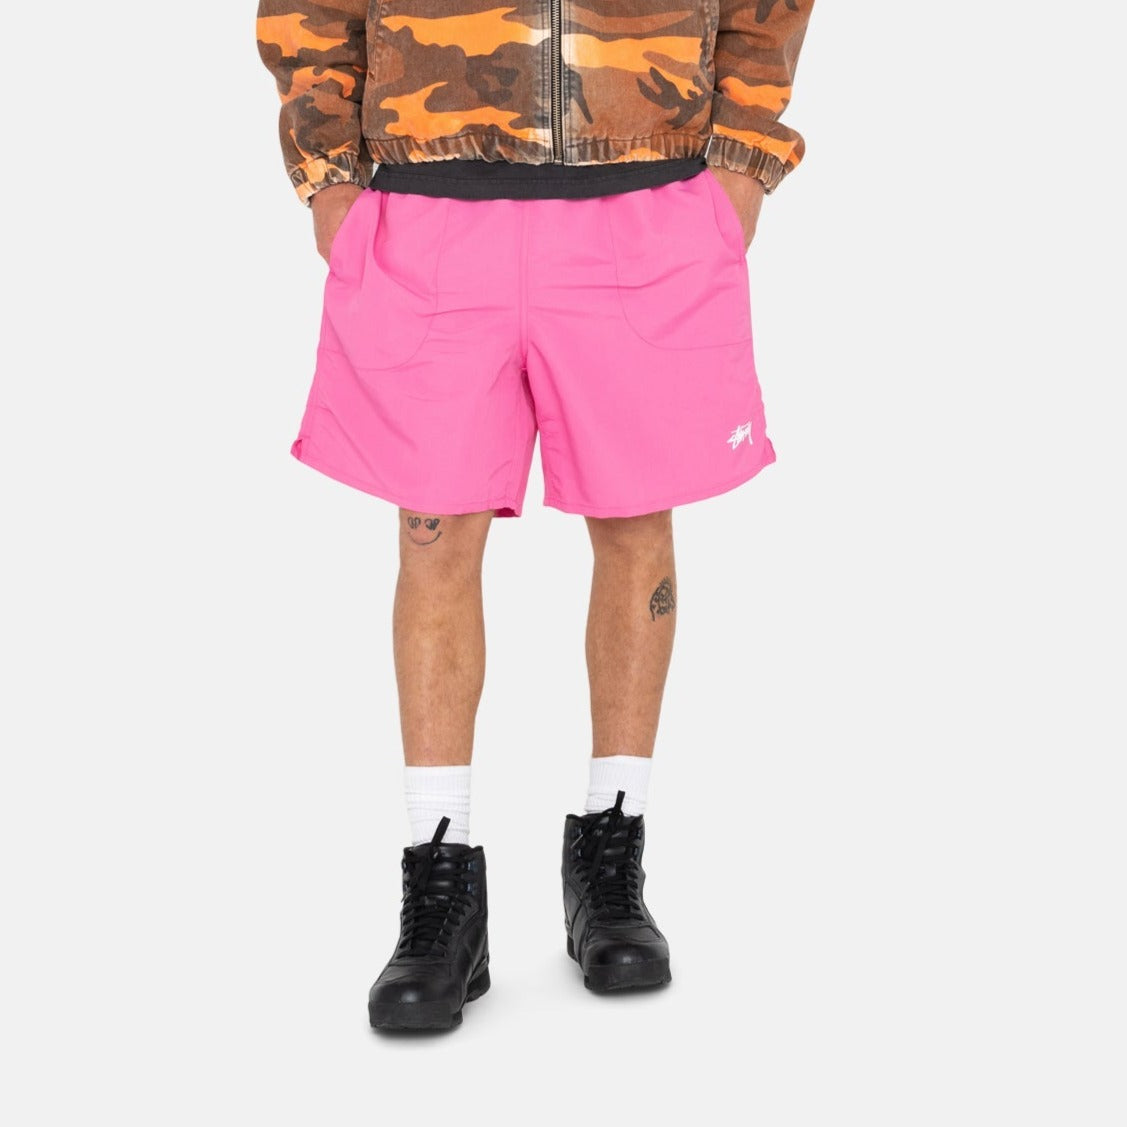 Half body photo of model wearing the Stock Water Short - Gum Pink.